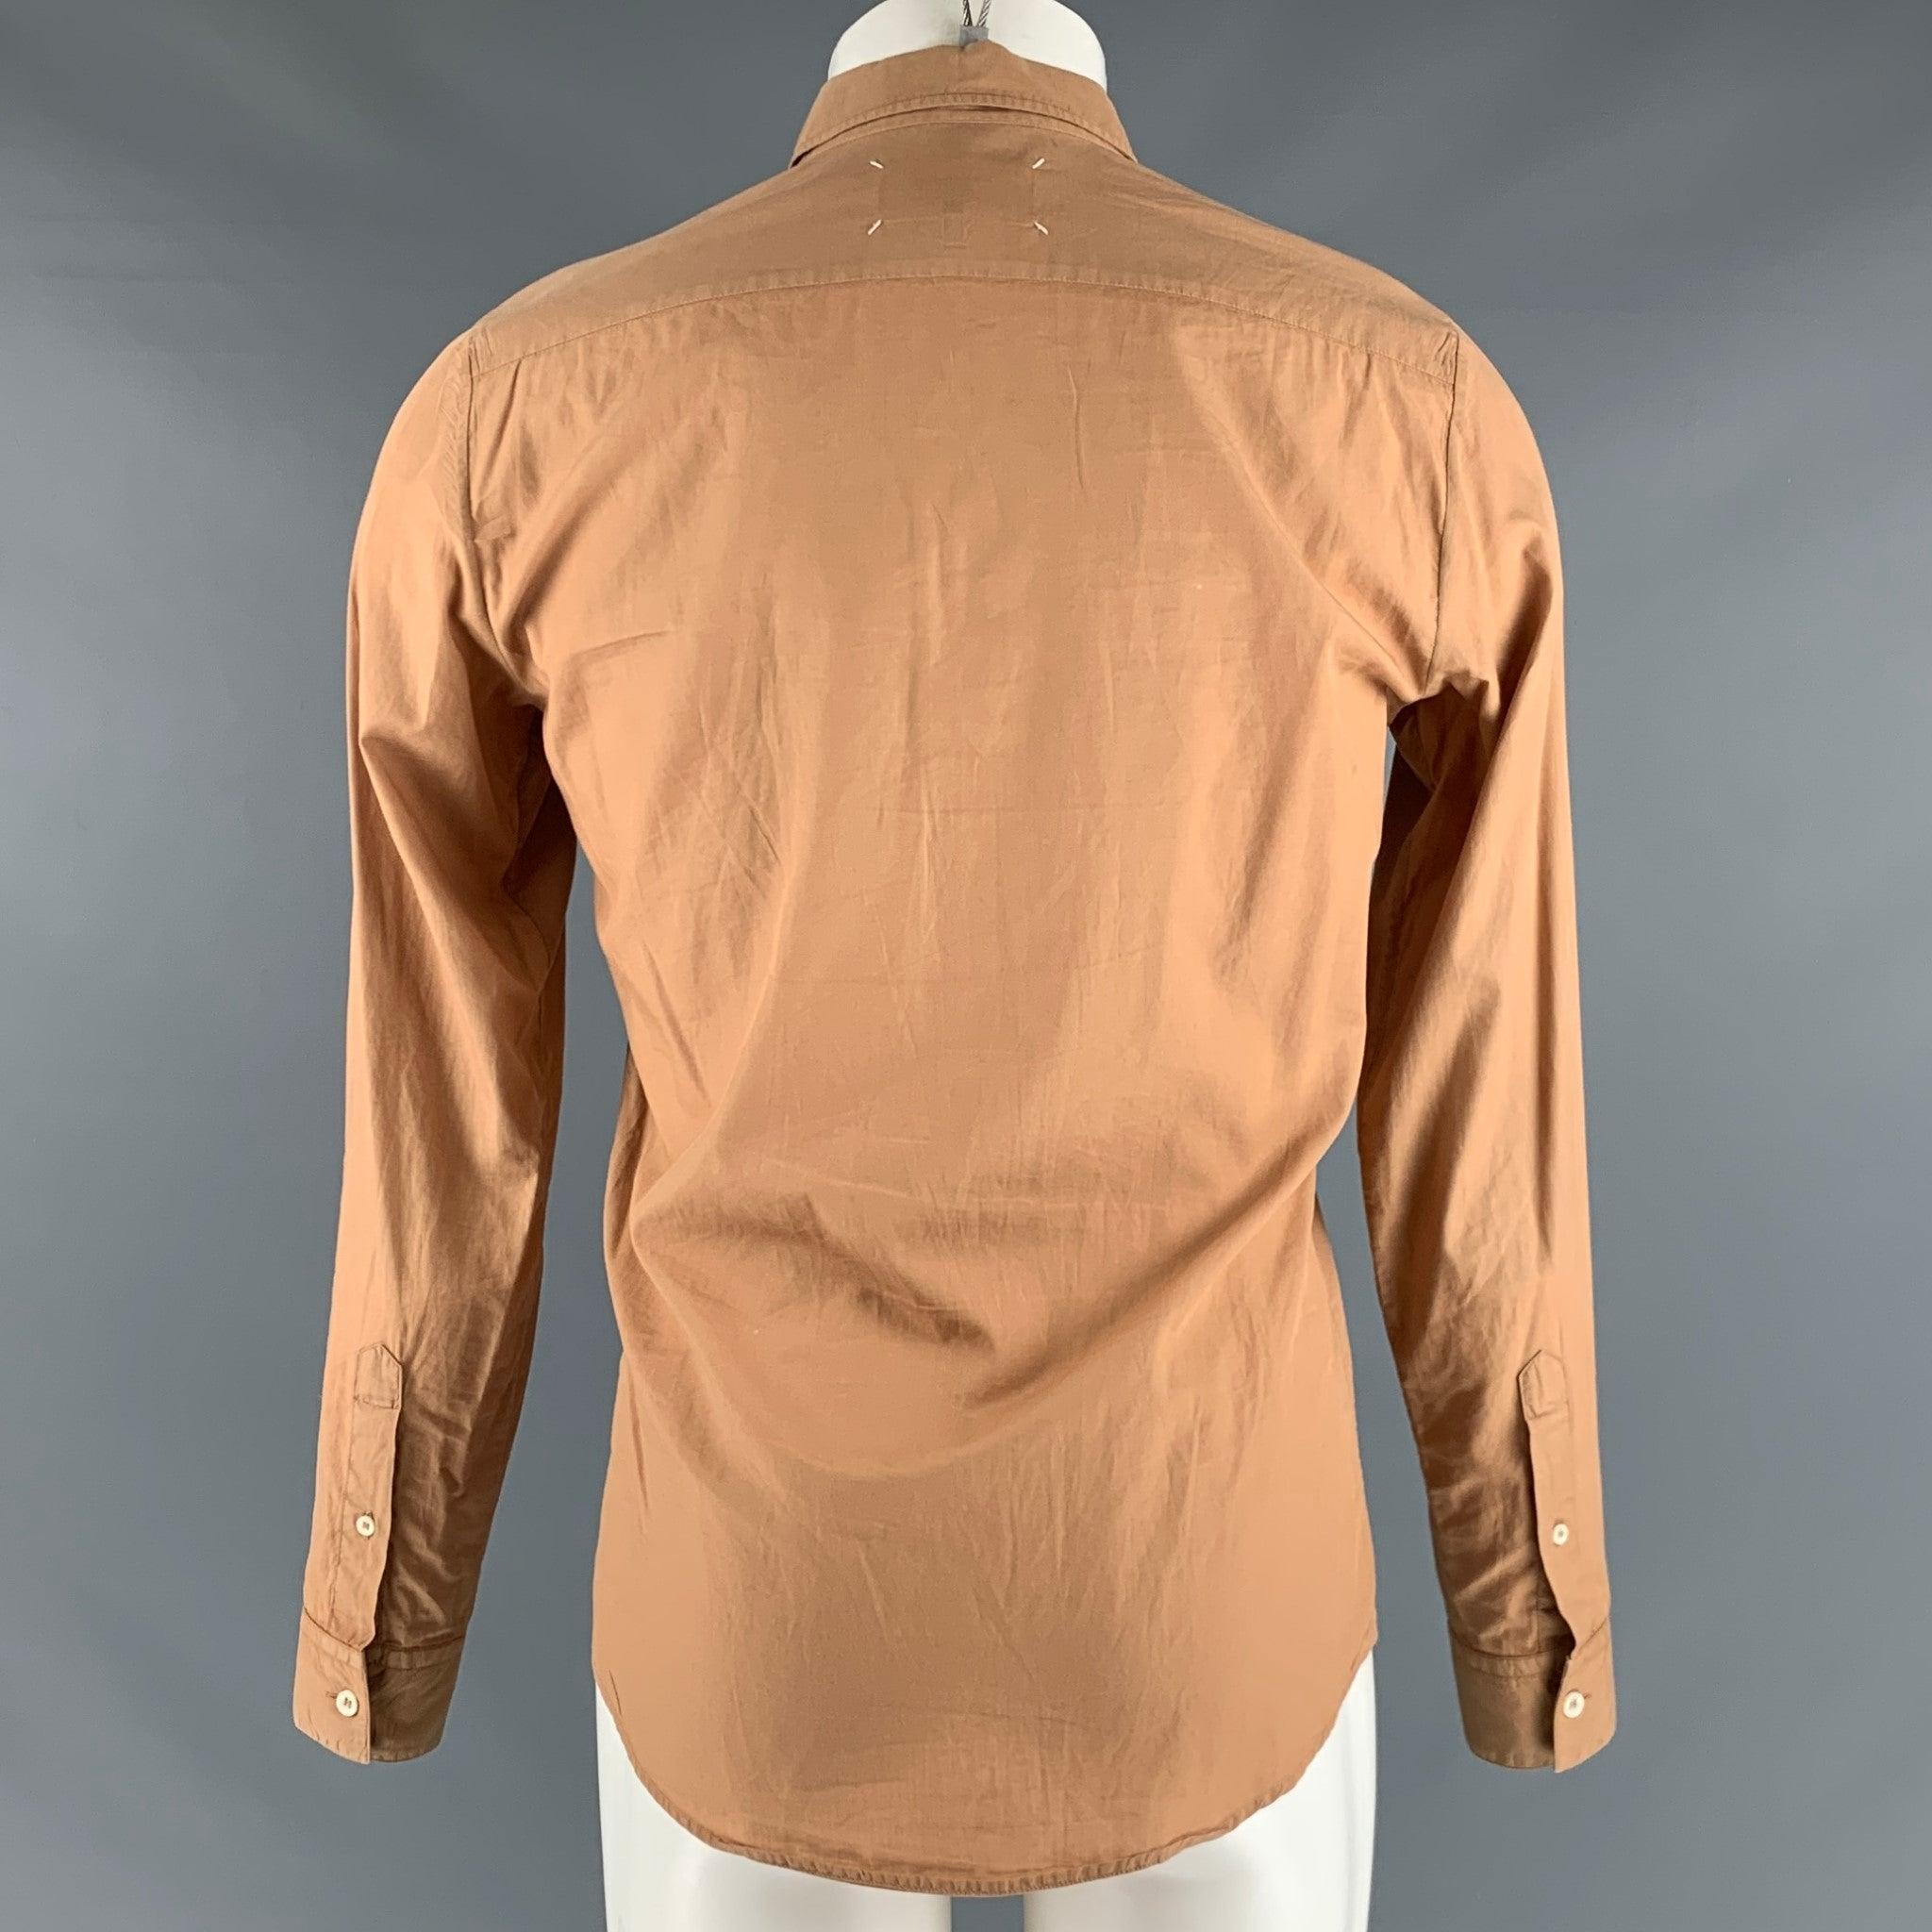 MAISON MARTIN MARGIELA Size S Orange Cotton Slim Fit Long Sleeve Shirt In Good Condition For Sale In San Francisco, CA